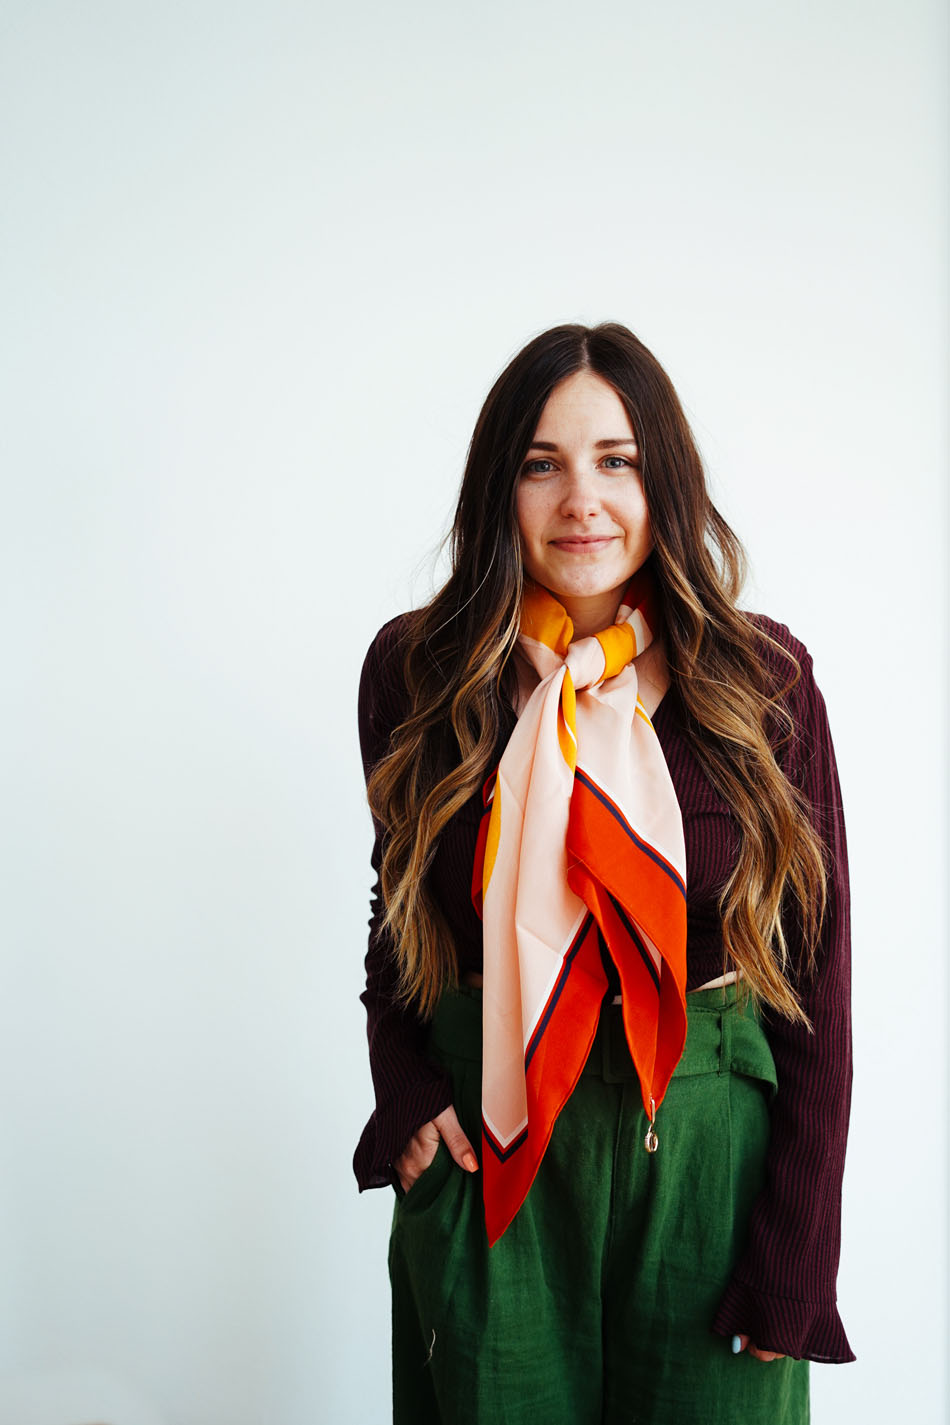 How To Wear A Hermes Scarf (Or Other Scarf) To Elevate Your Style!